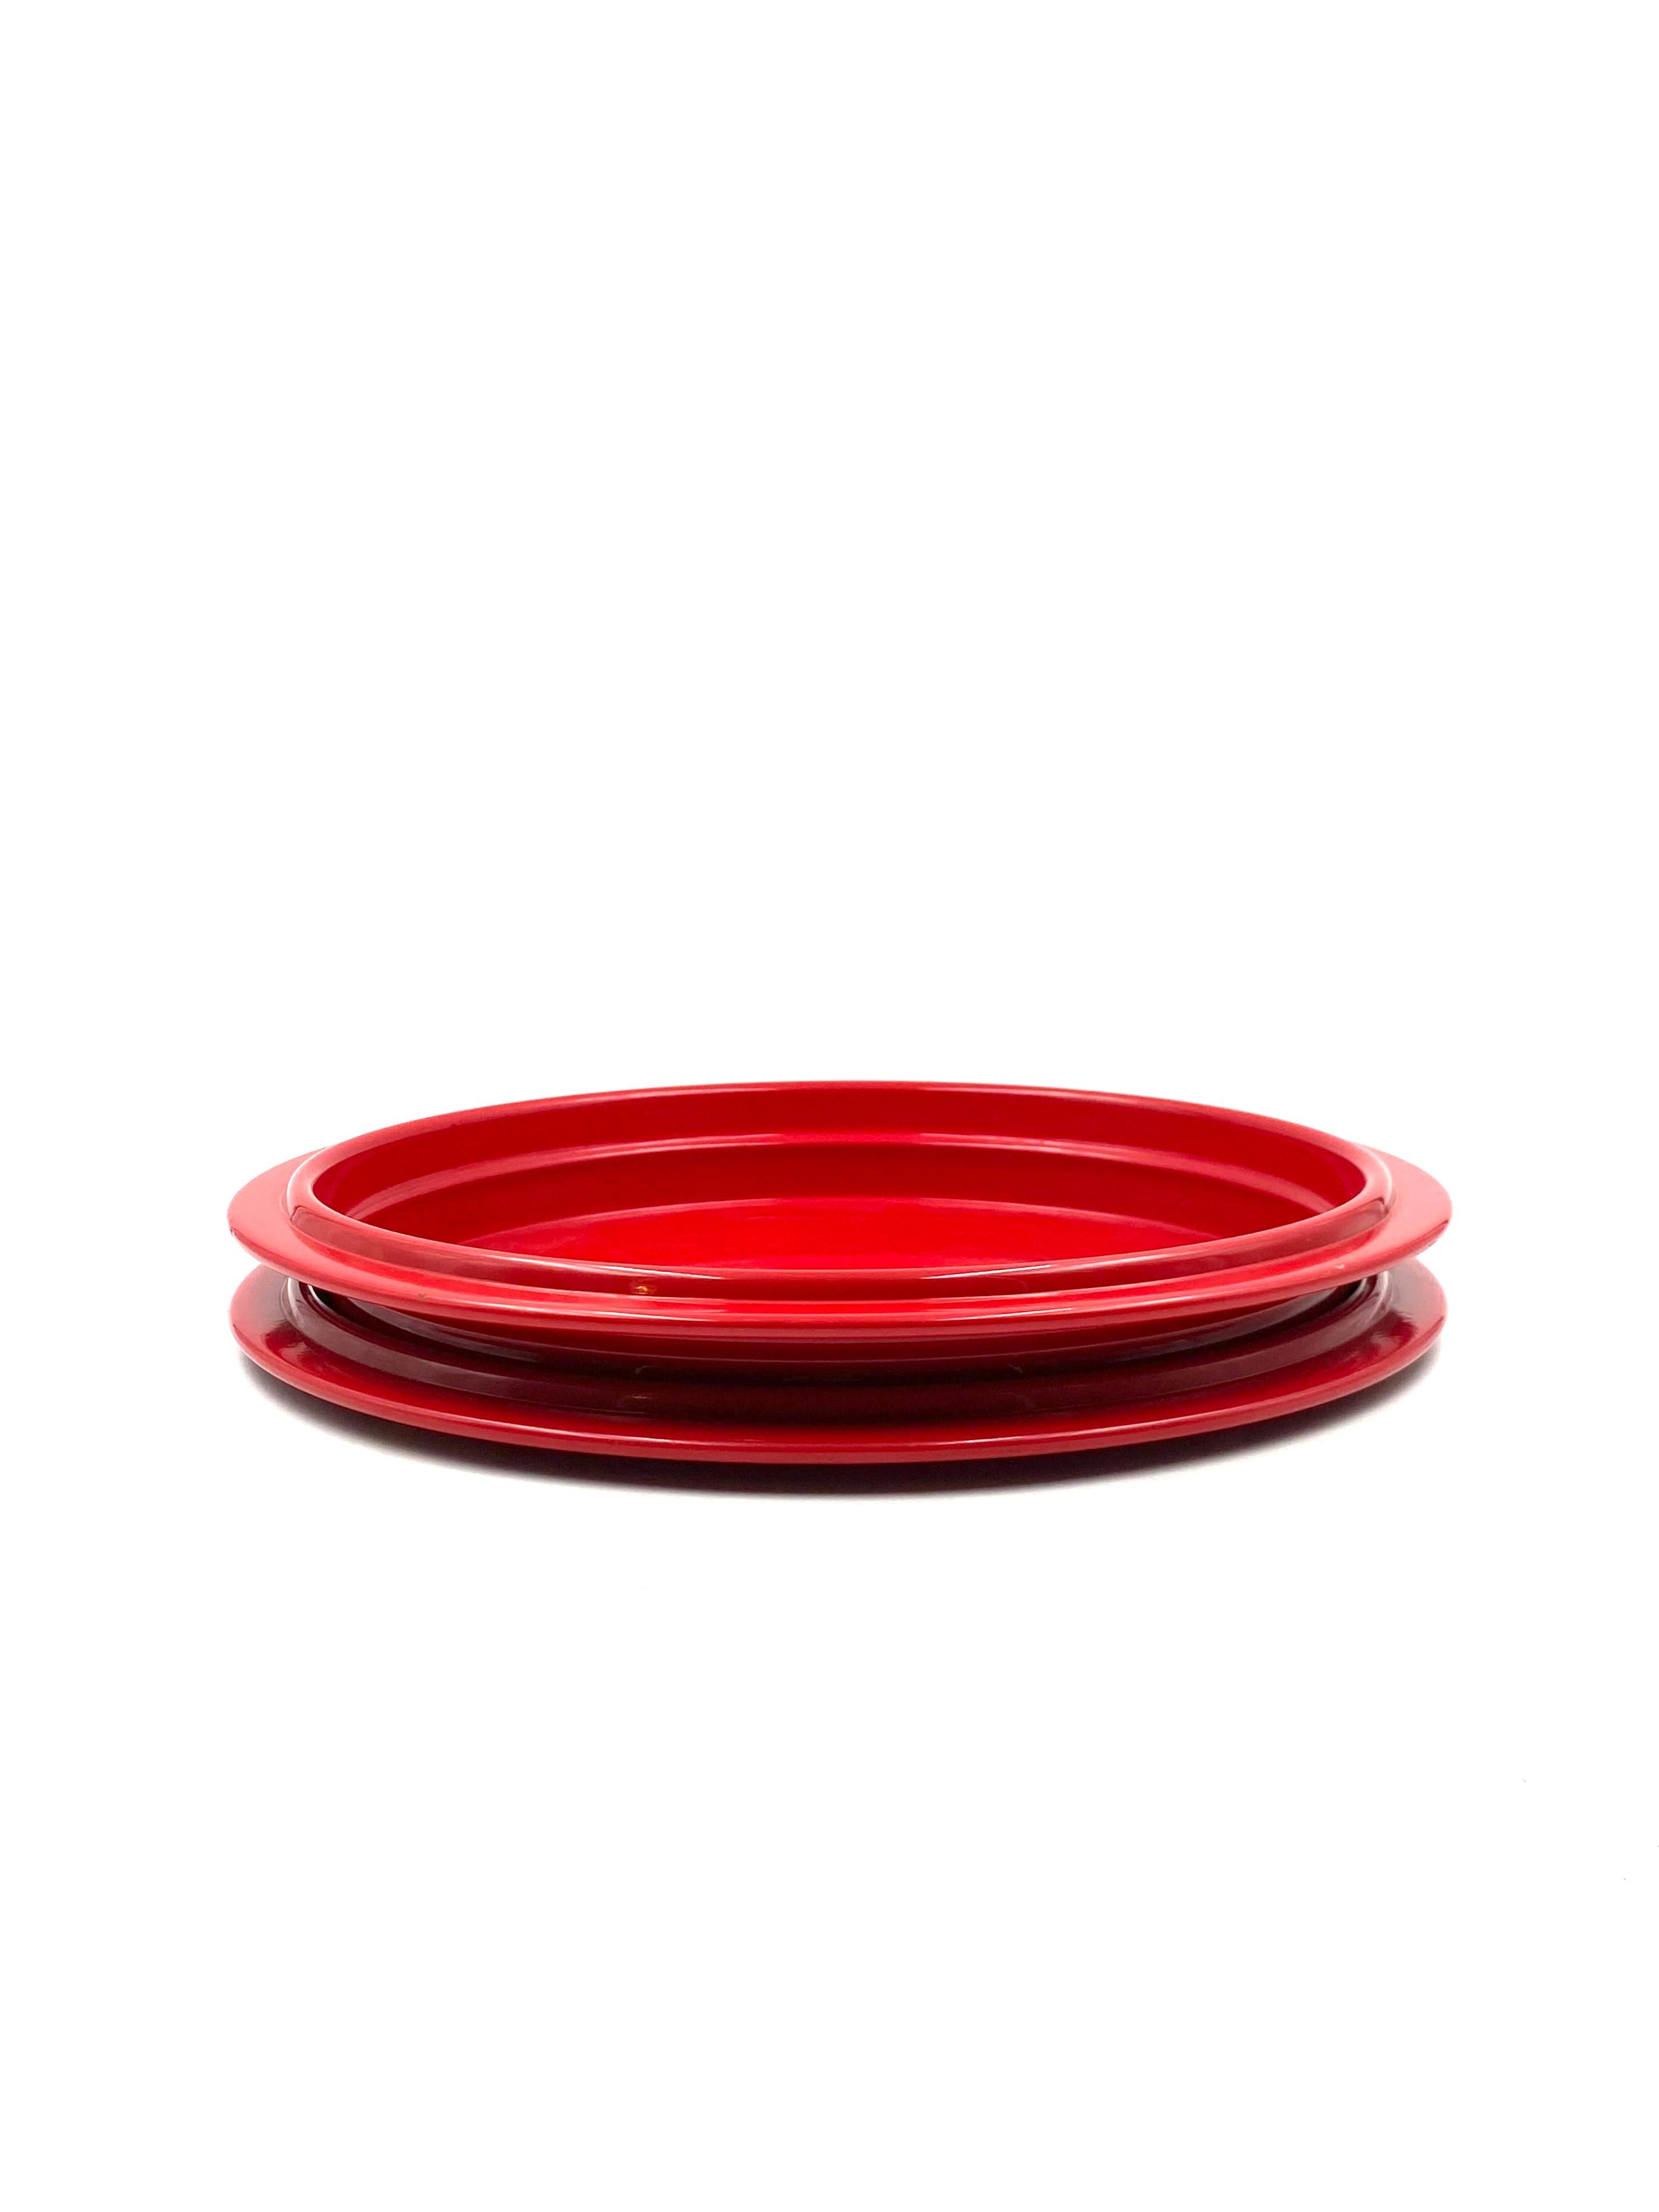 Gianfranco Frattini, Red Centerpiece / Tray, Progetti Italy, 1970s In Excellent Condition For Sale In Firenze, IT